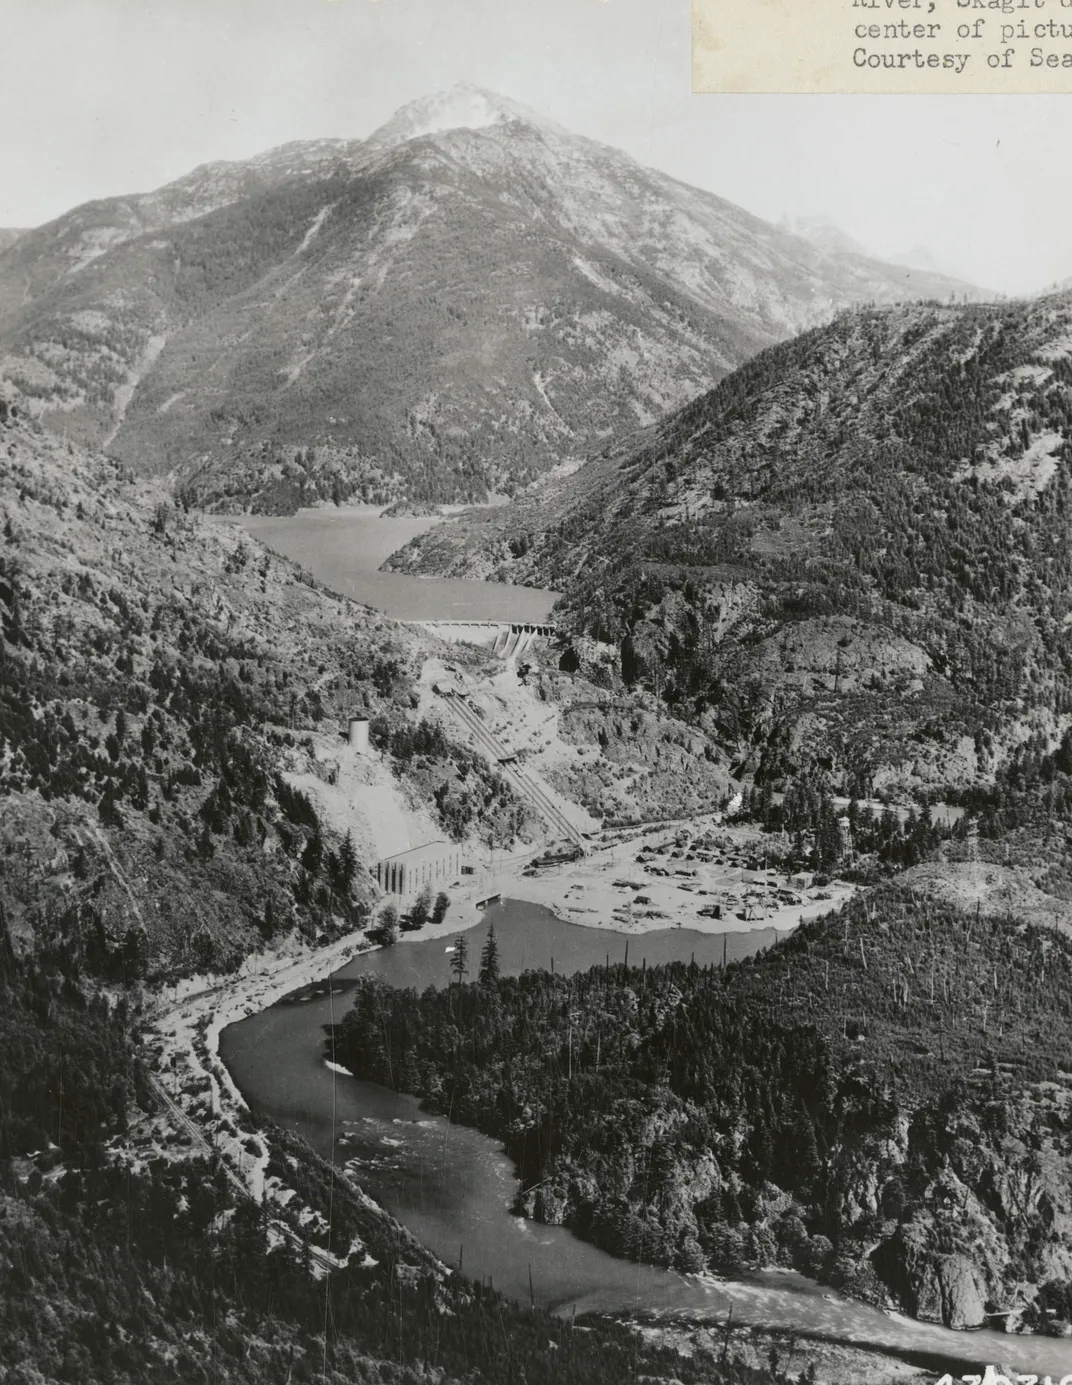 View of the Skagit River, with the Diablo dam (completed in 1930) visible